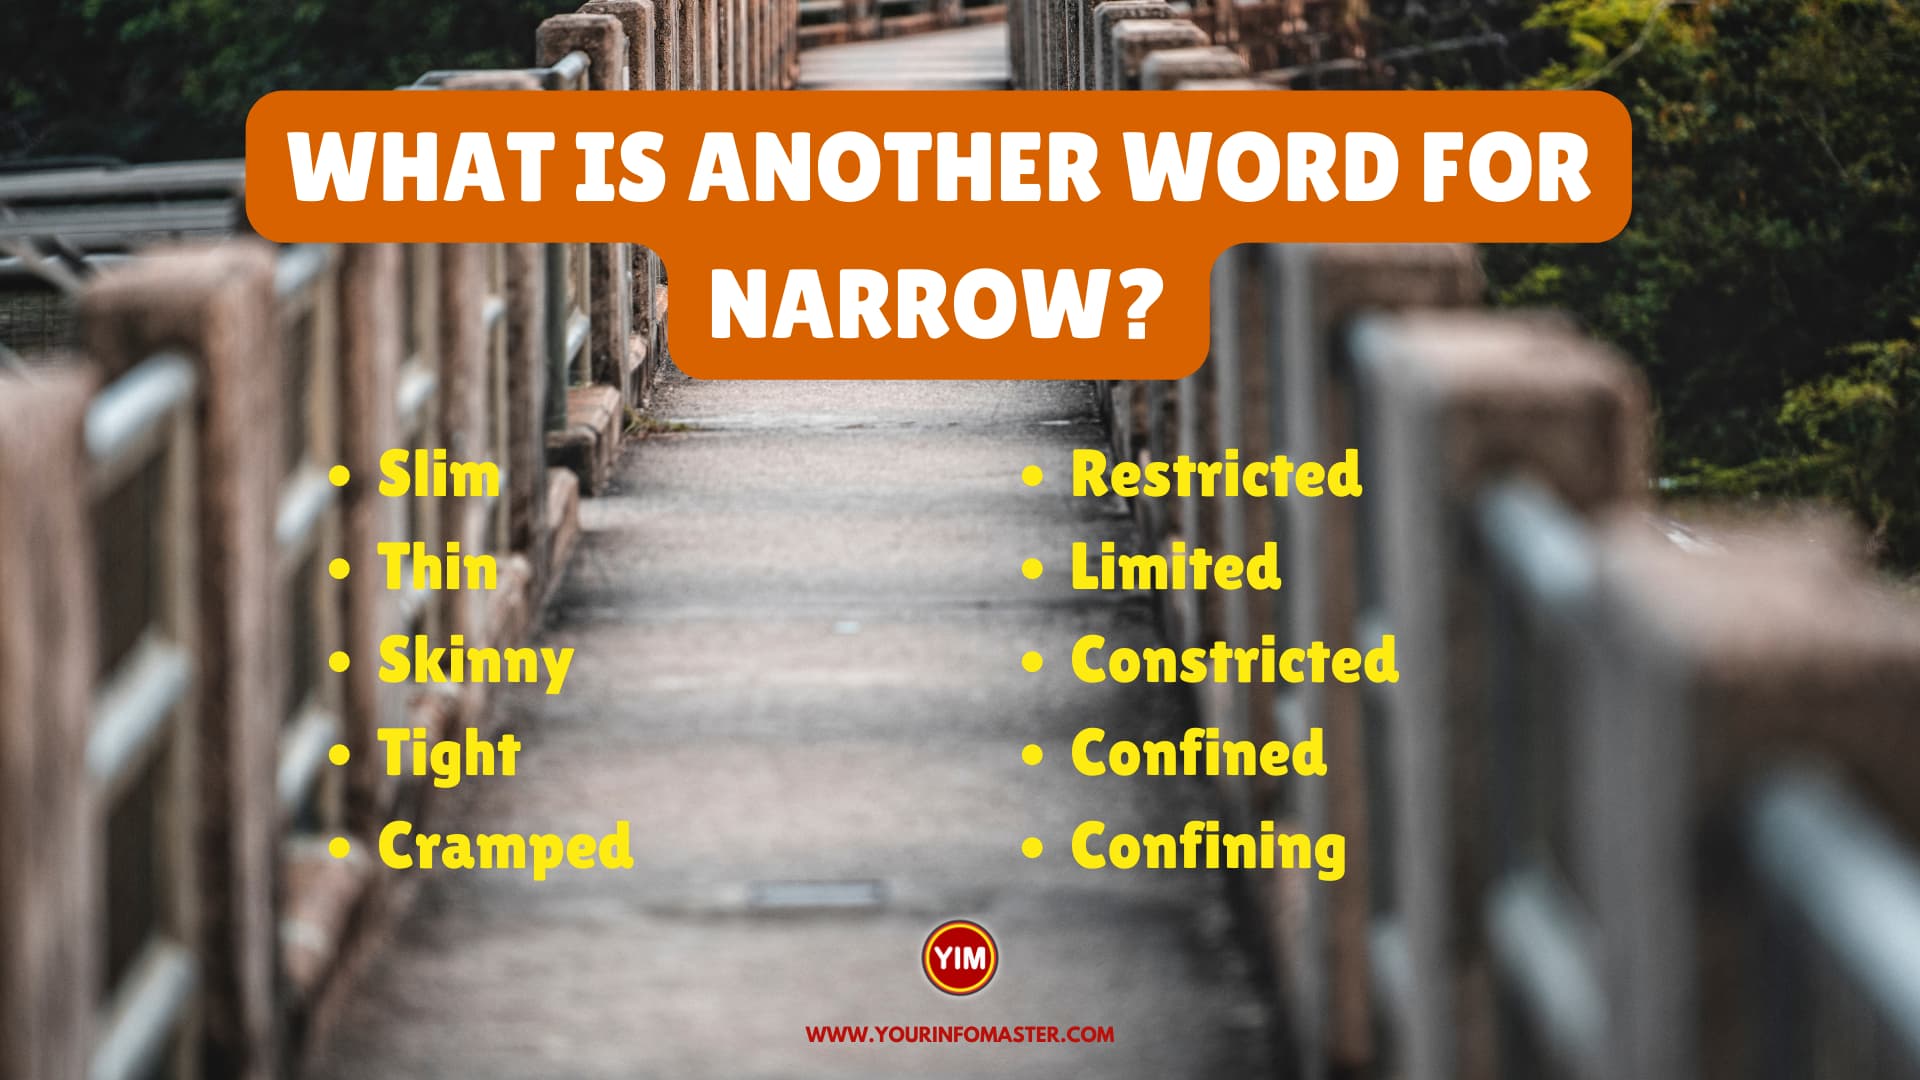 What is another word for Narrow